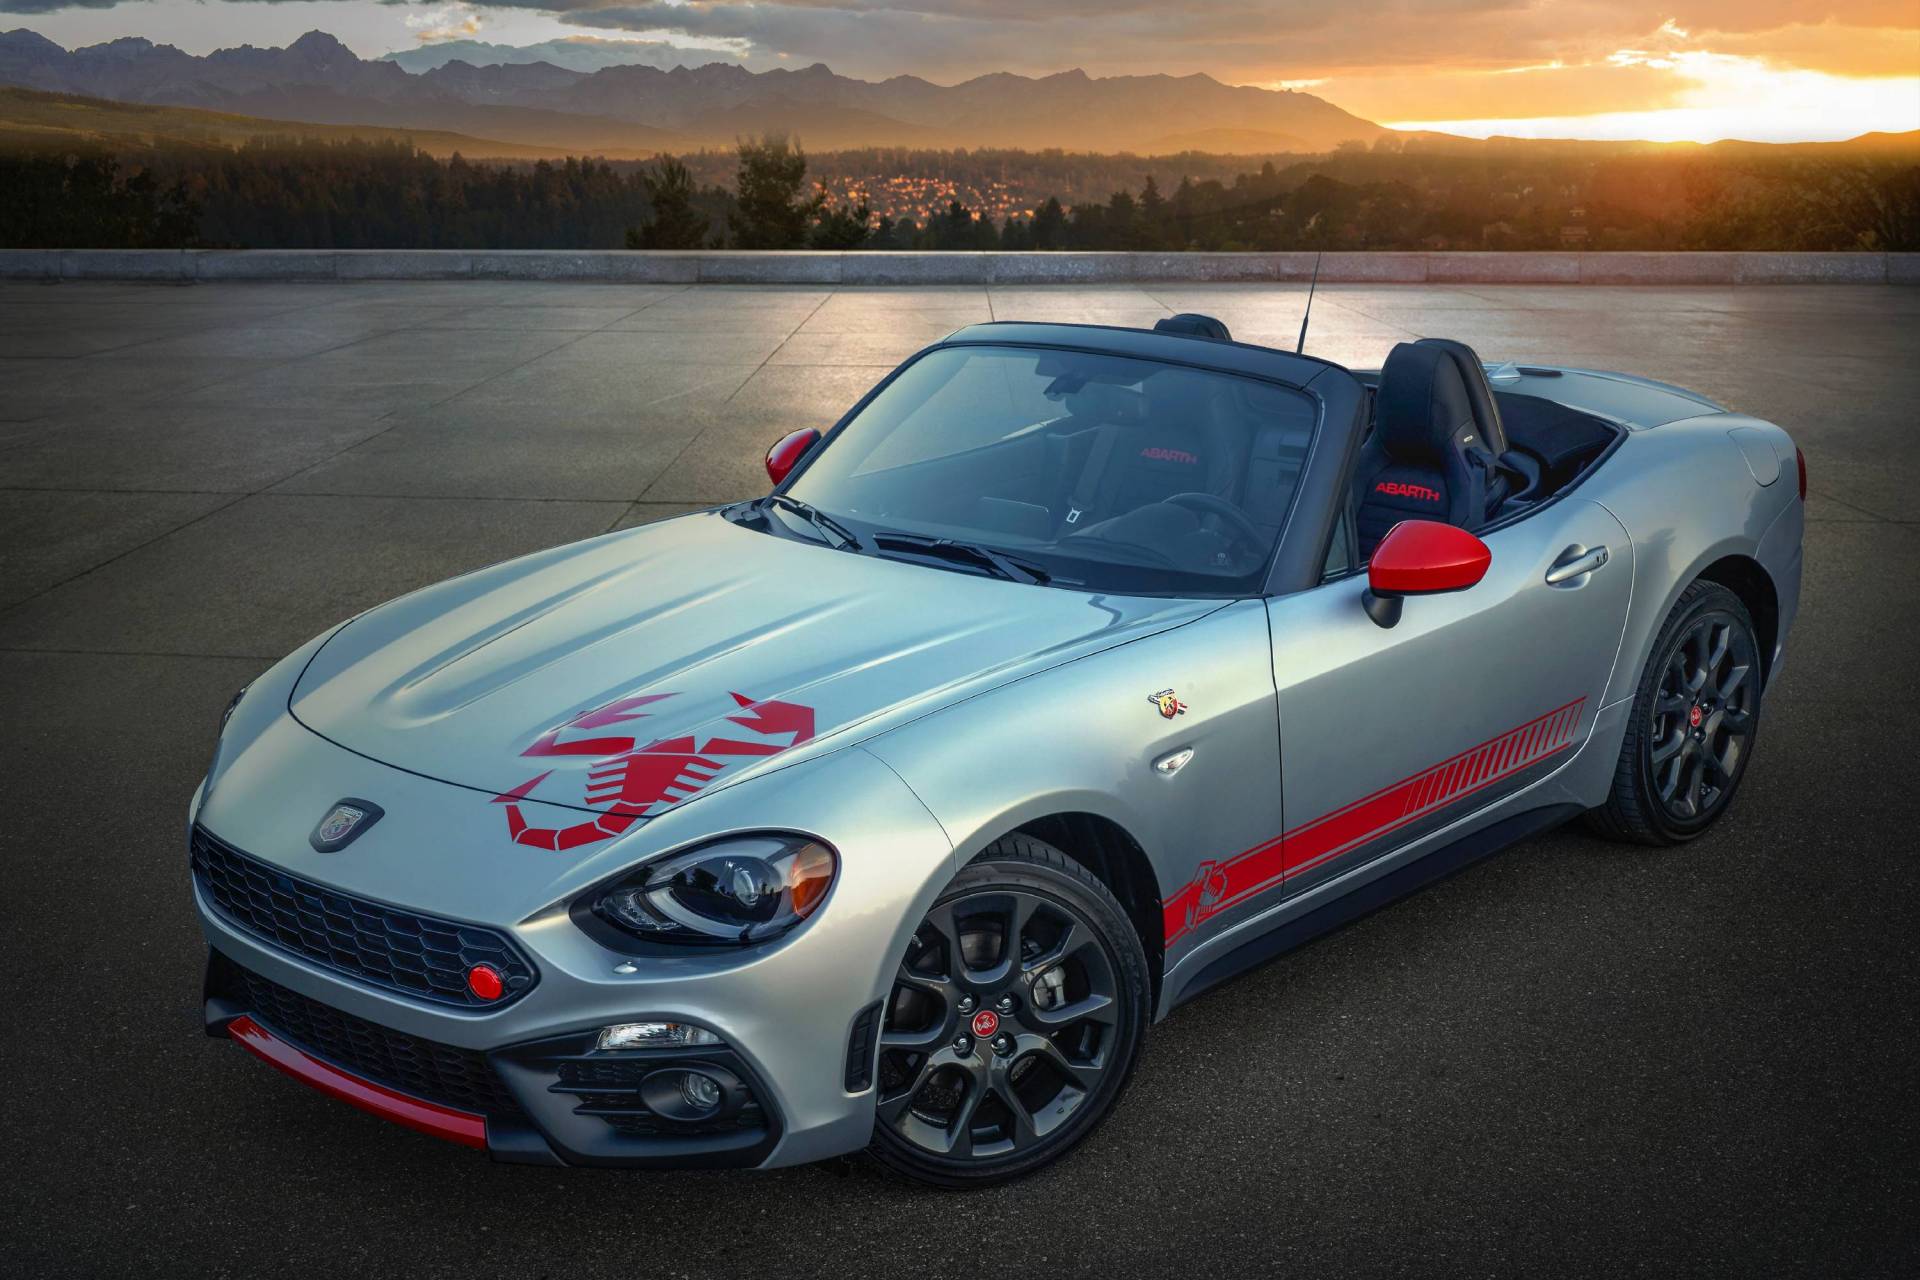 2020 Fiat 124 Spider Updated With Scorpion That's About It |